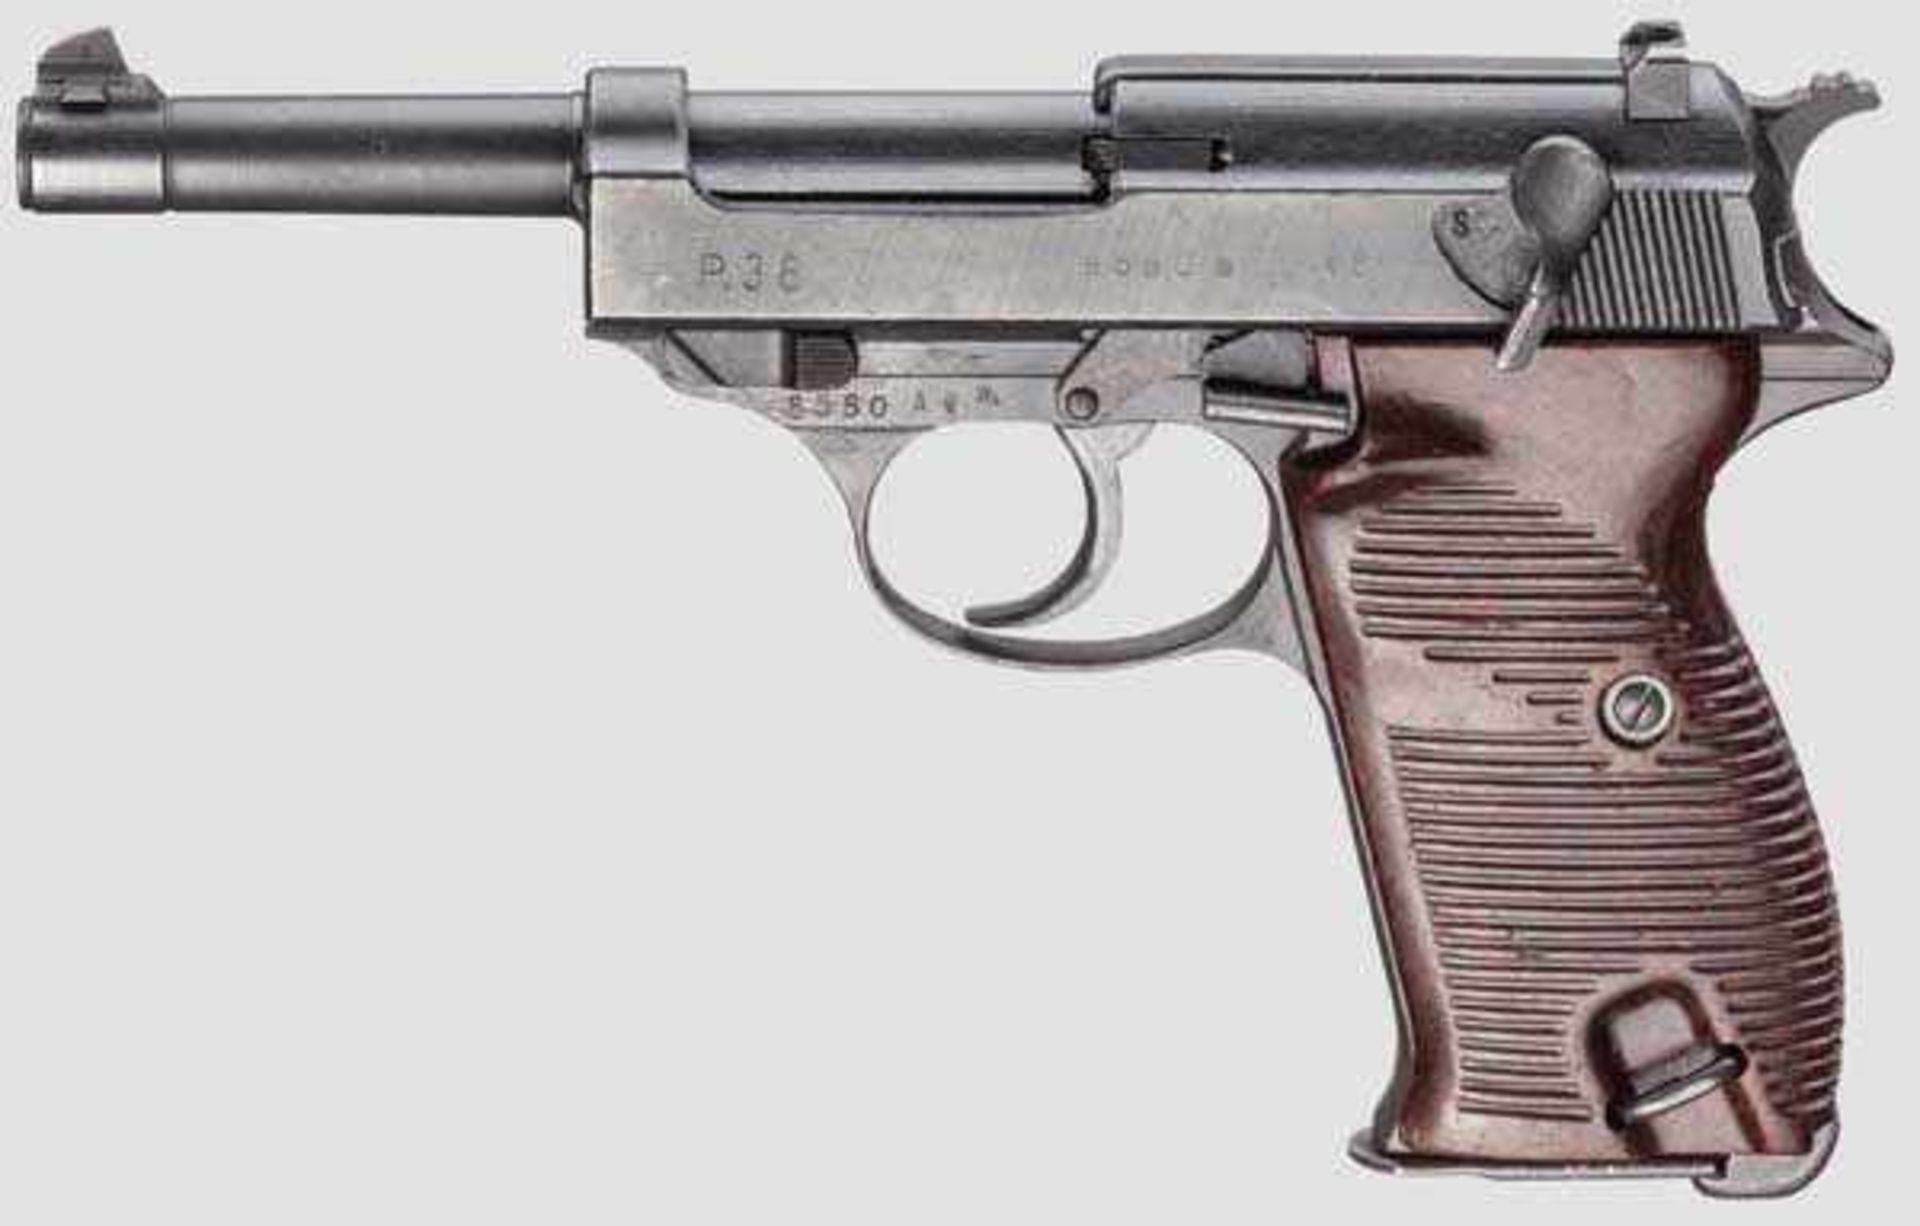 Walther P 38, Code {ac - 45{ Kal. 9 mm Luger, Nr. 8580a. Nummerngleich. Blanker Lauf.